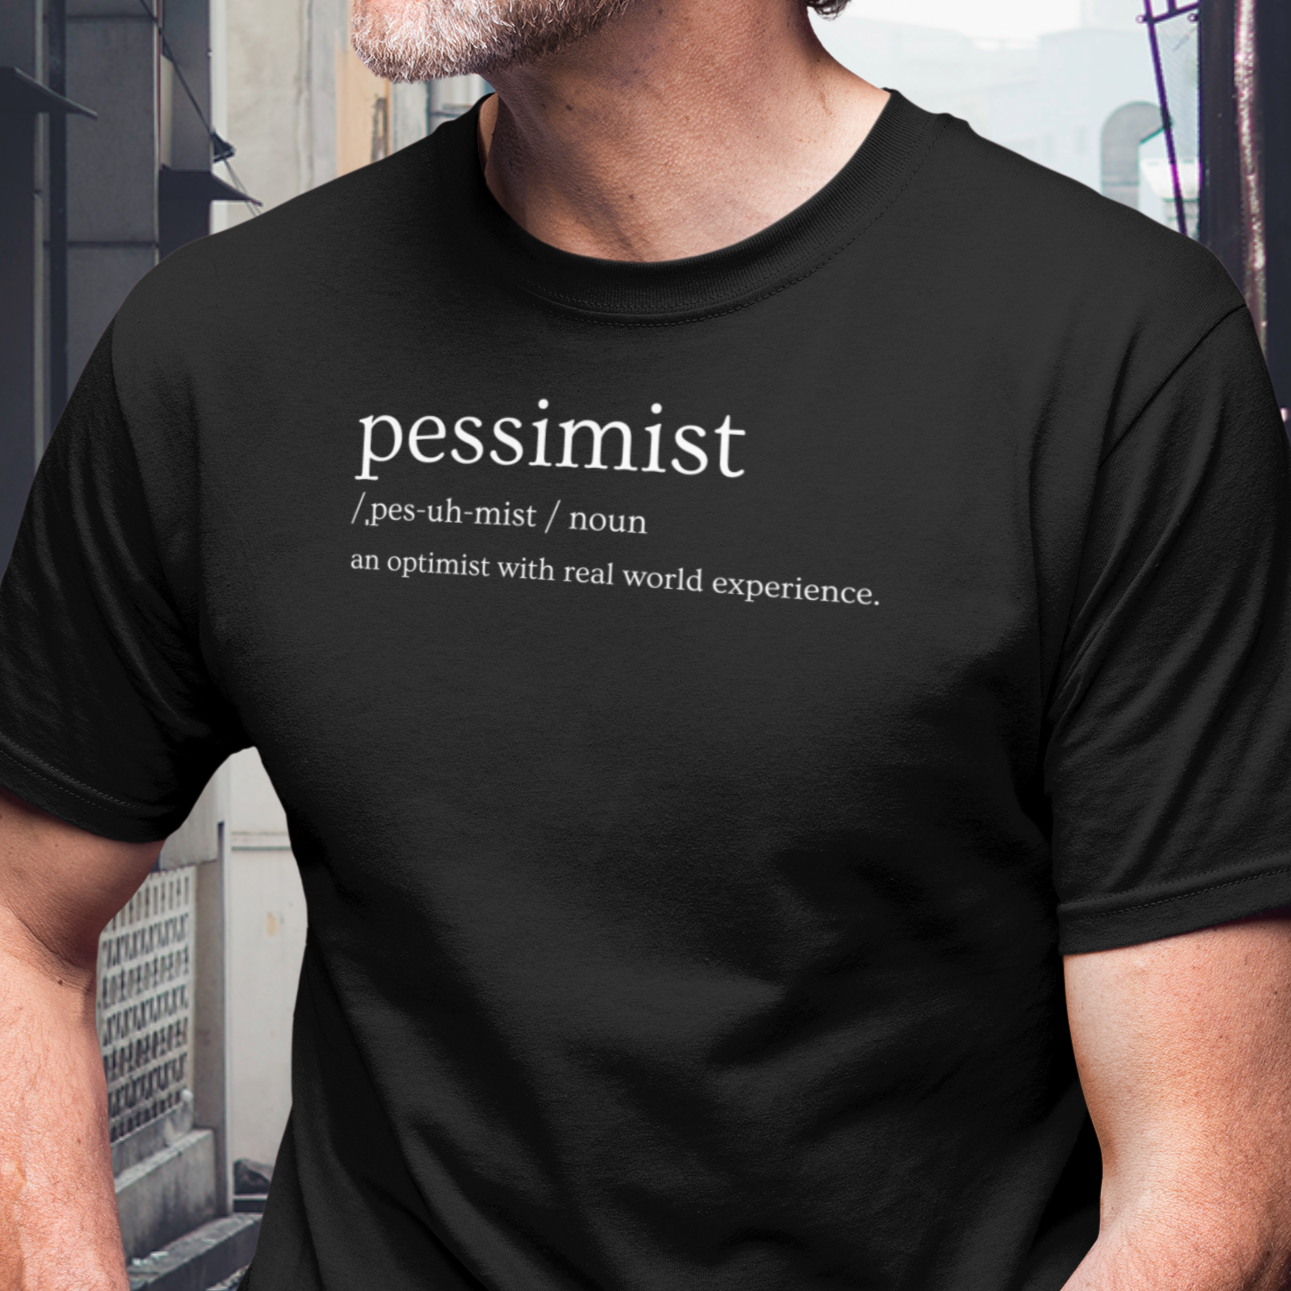 pessimist-an-optimist-with-real-world-experience-black-t-shirt-mockup-of-the-closeup-of-a-bearded-man-wearing-a-tee